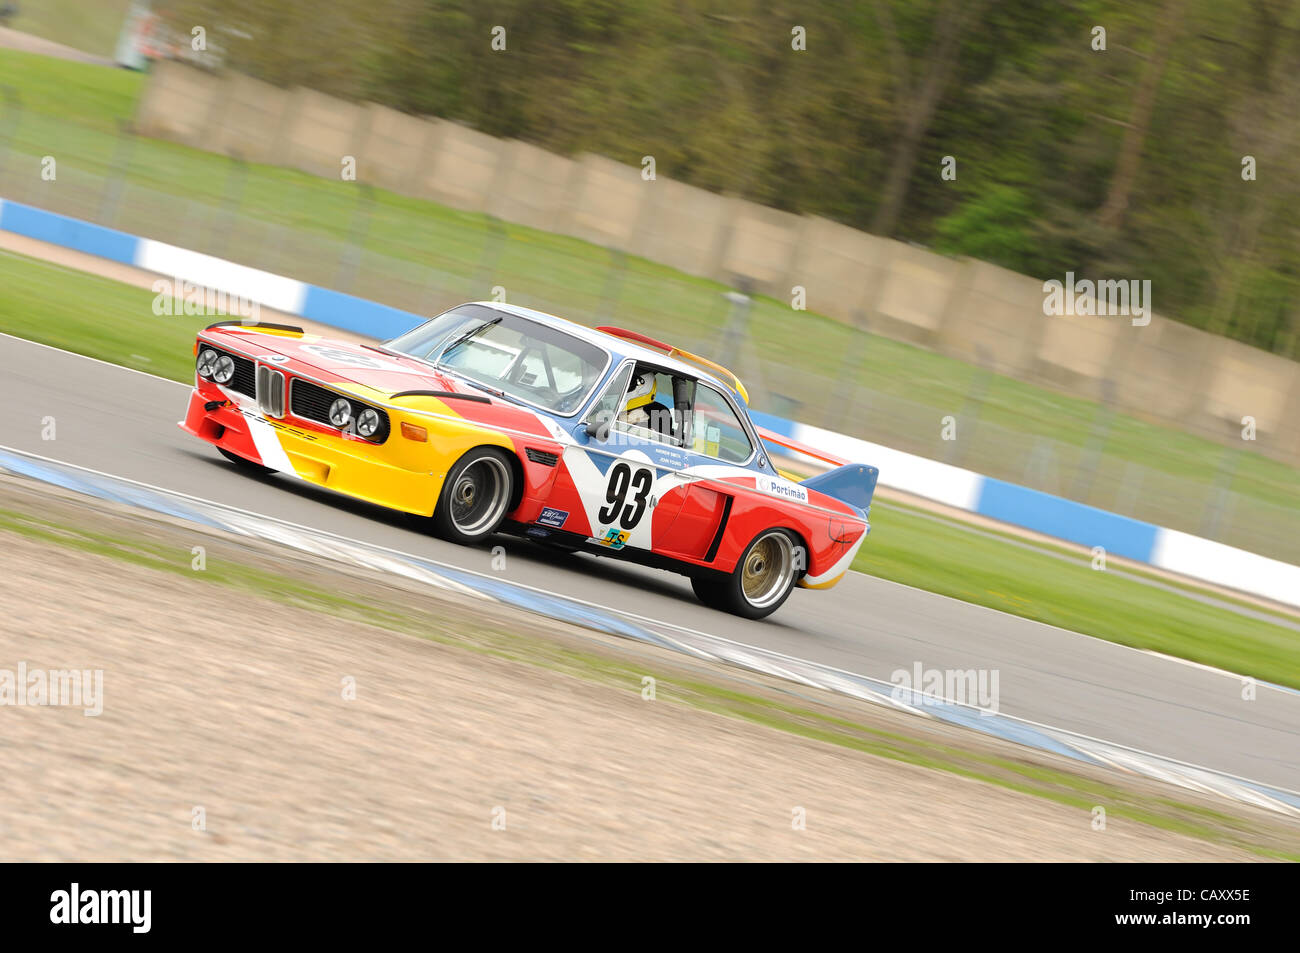 5th May 2012, Donington Park Racing Circuit, UK.  The BMW 3.0 CSL of Andrew Smith and John Young at the Donington Historic Festival Stock Photo